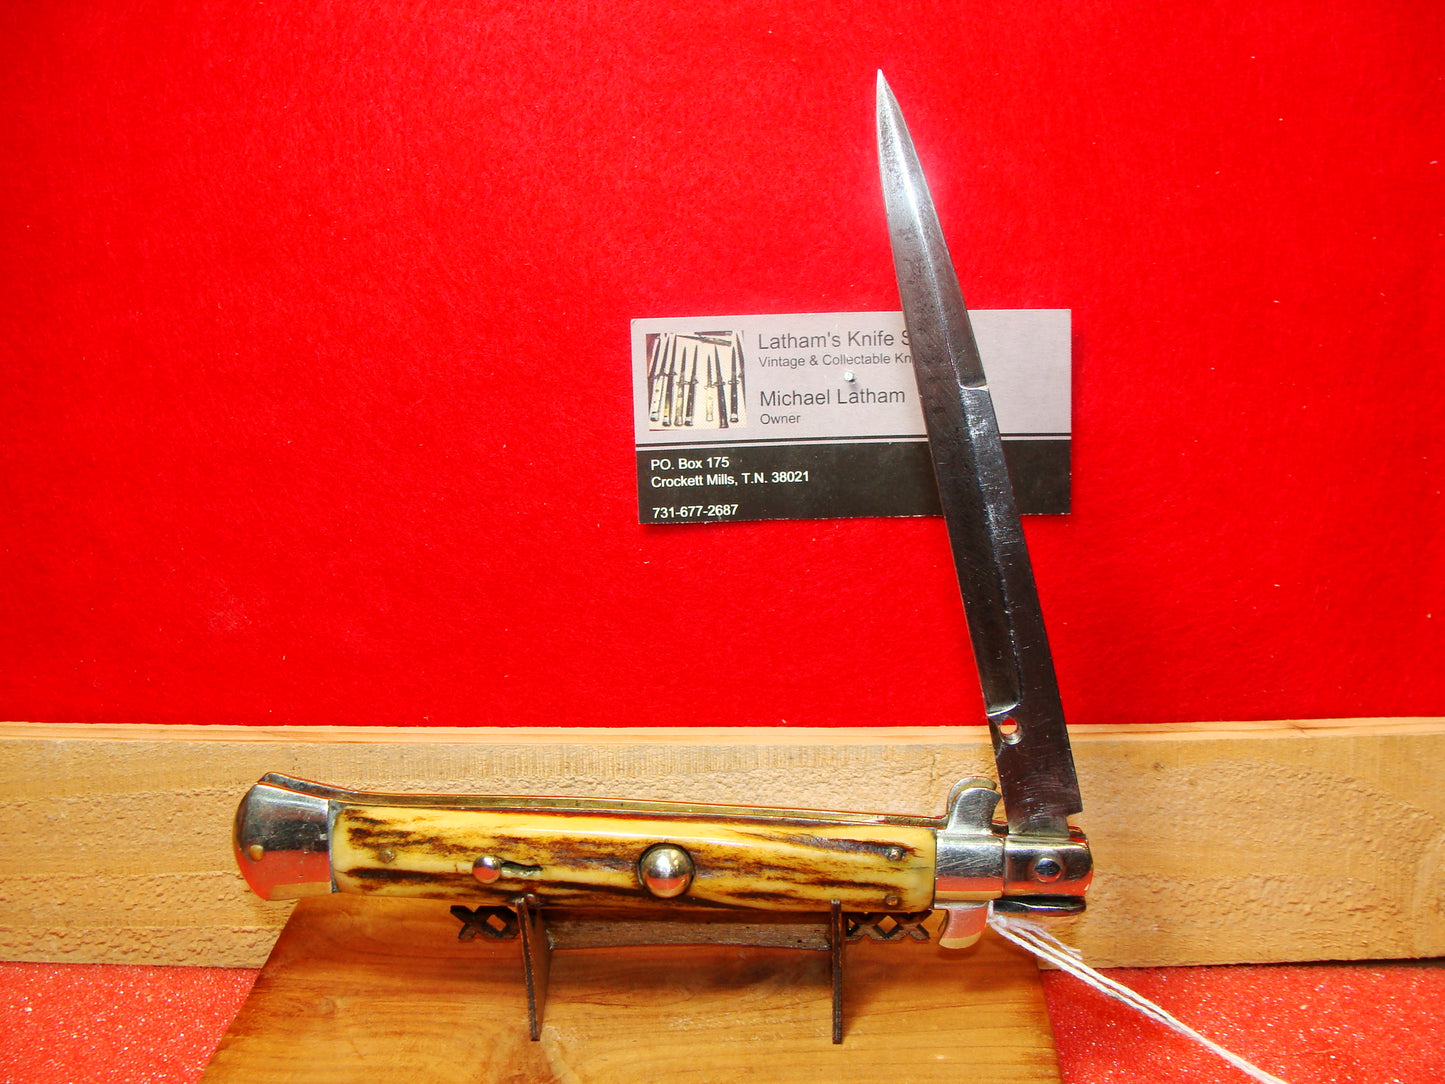 UNMARKED MANIAGO ITALY FLAT GUARD 1920-30 PICK LOCK STILETTO 28 CM ITALIAN AUTOMATIC KNIFE RARE STAG HANDLES